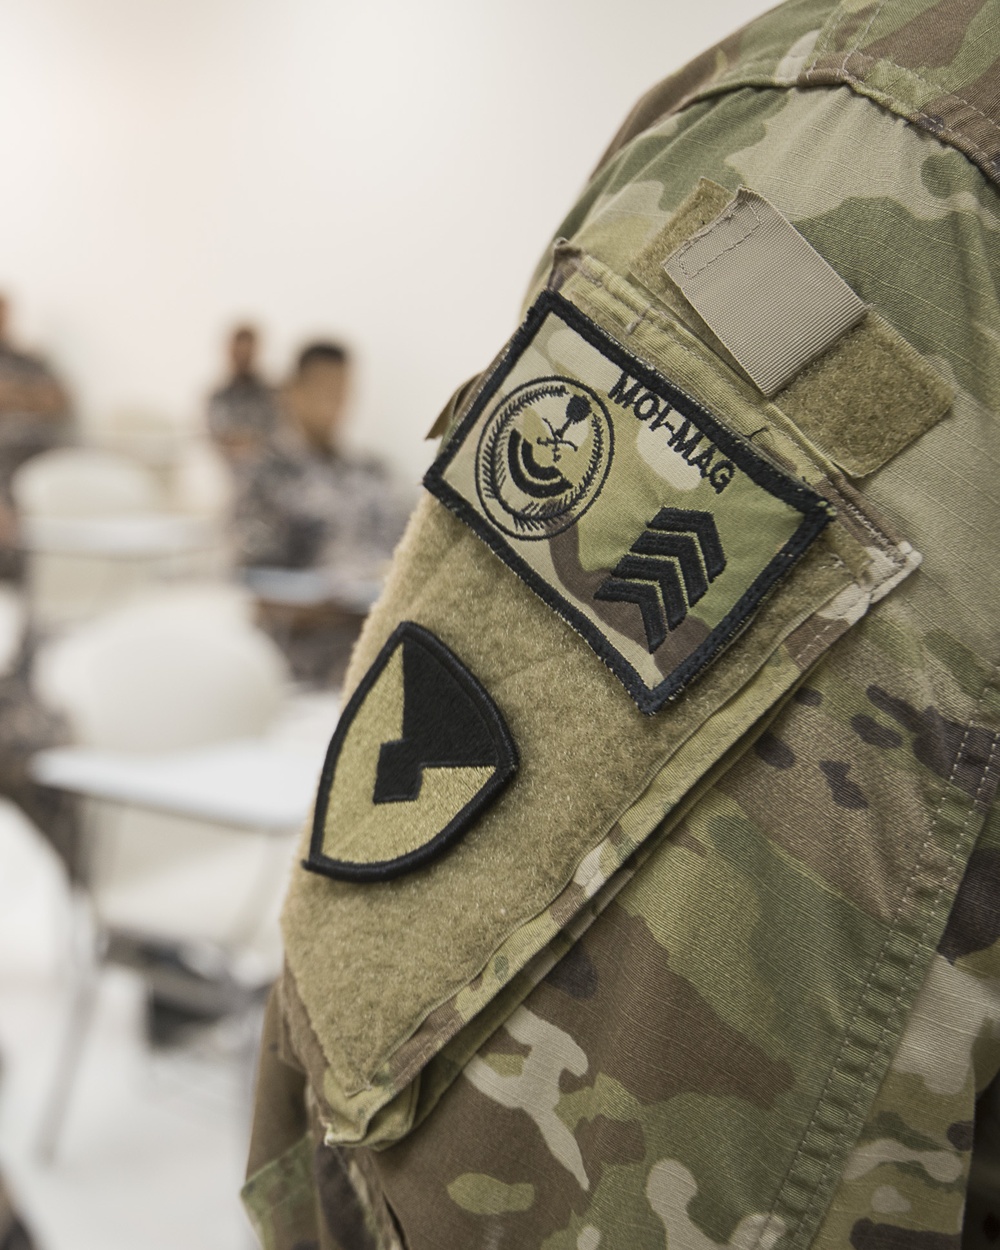 Deployed soldiers train Saudi security forces